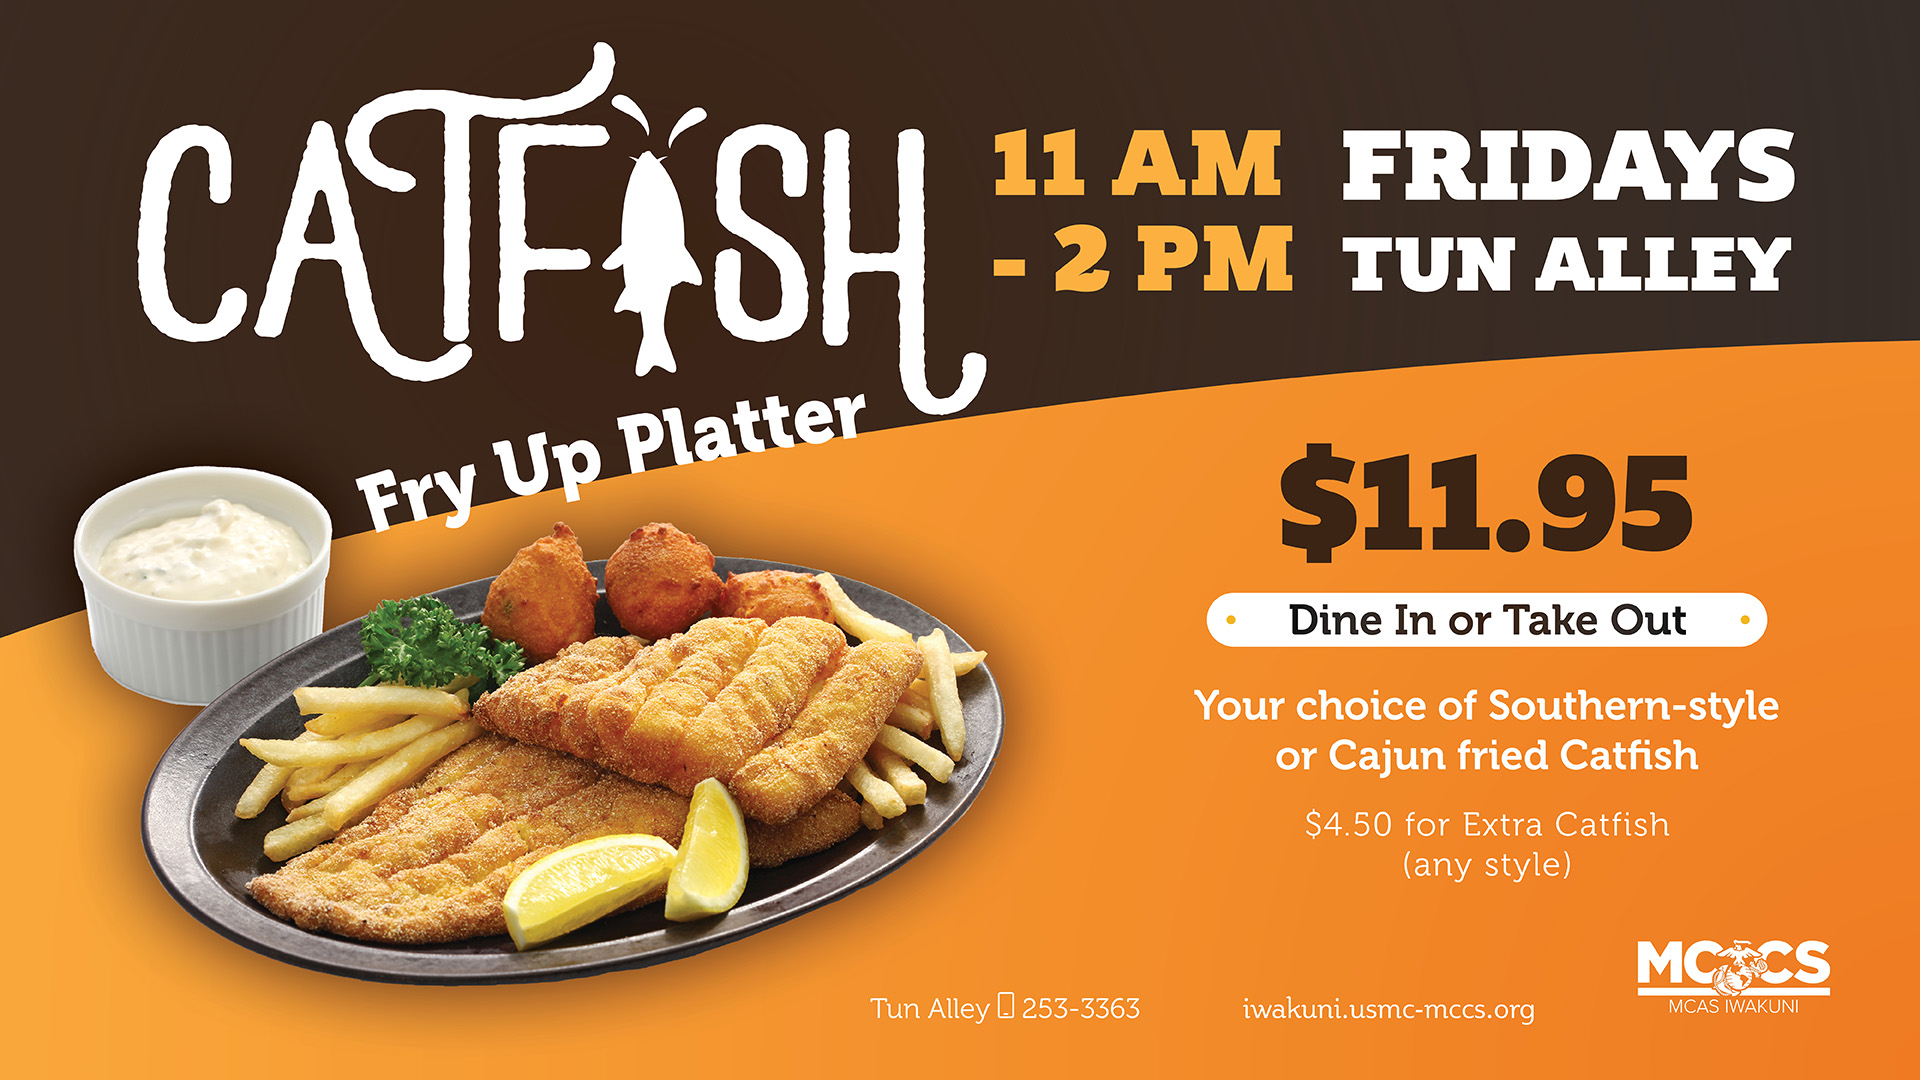 Catfish Friday at JD's Grille